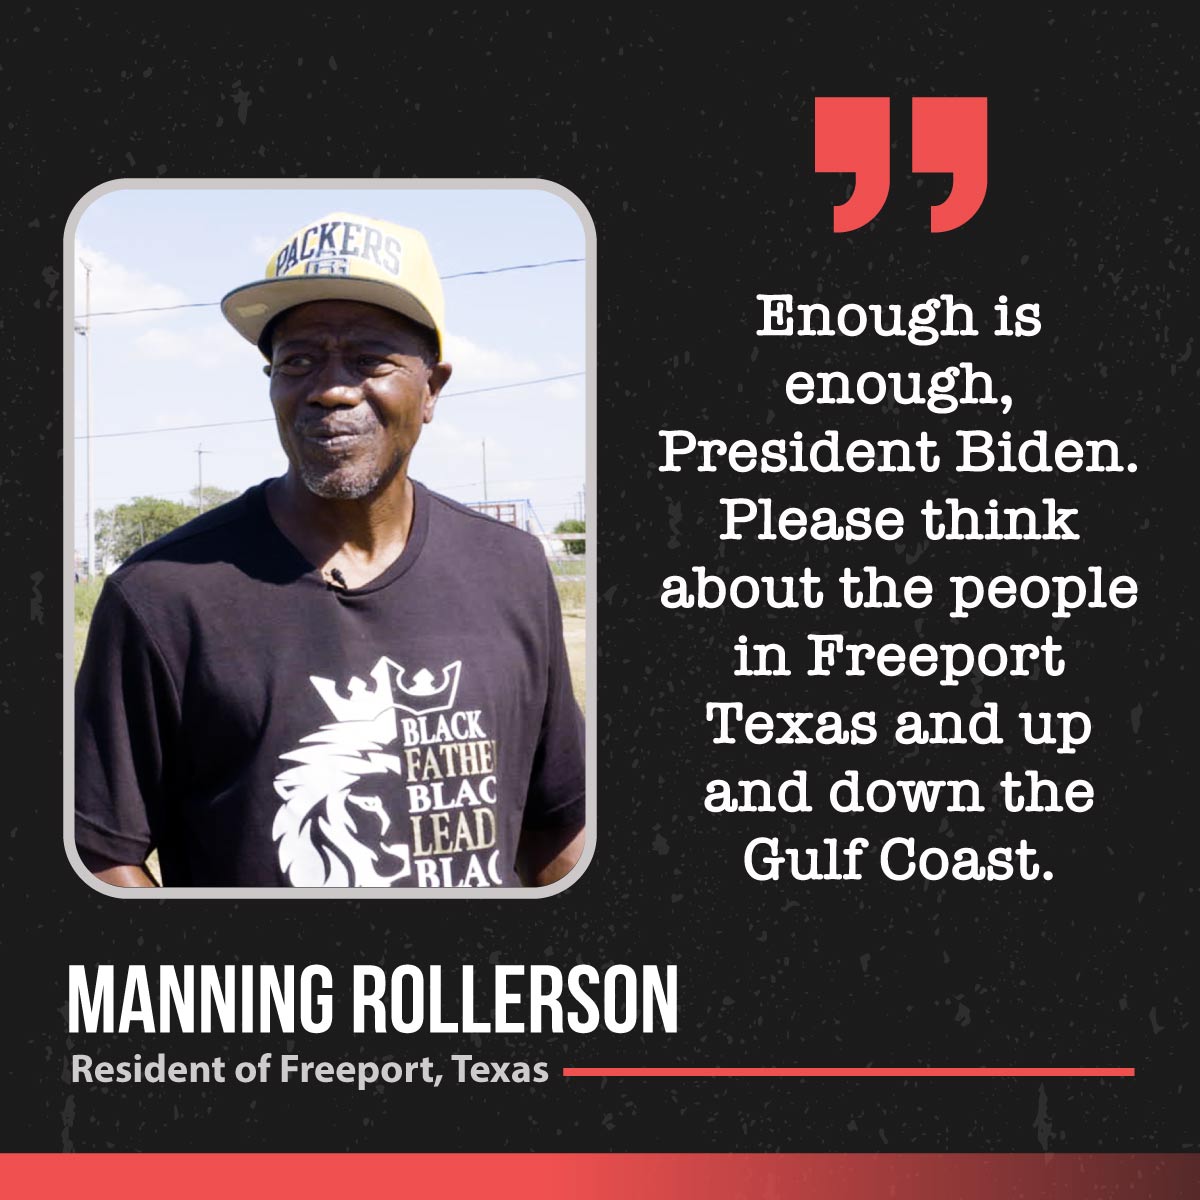 An image of Freeport, Texas resident Manning Rollerson, with a quote to the right of the image saying 